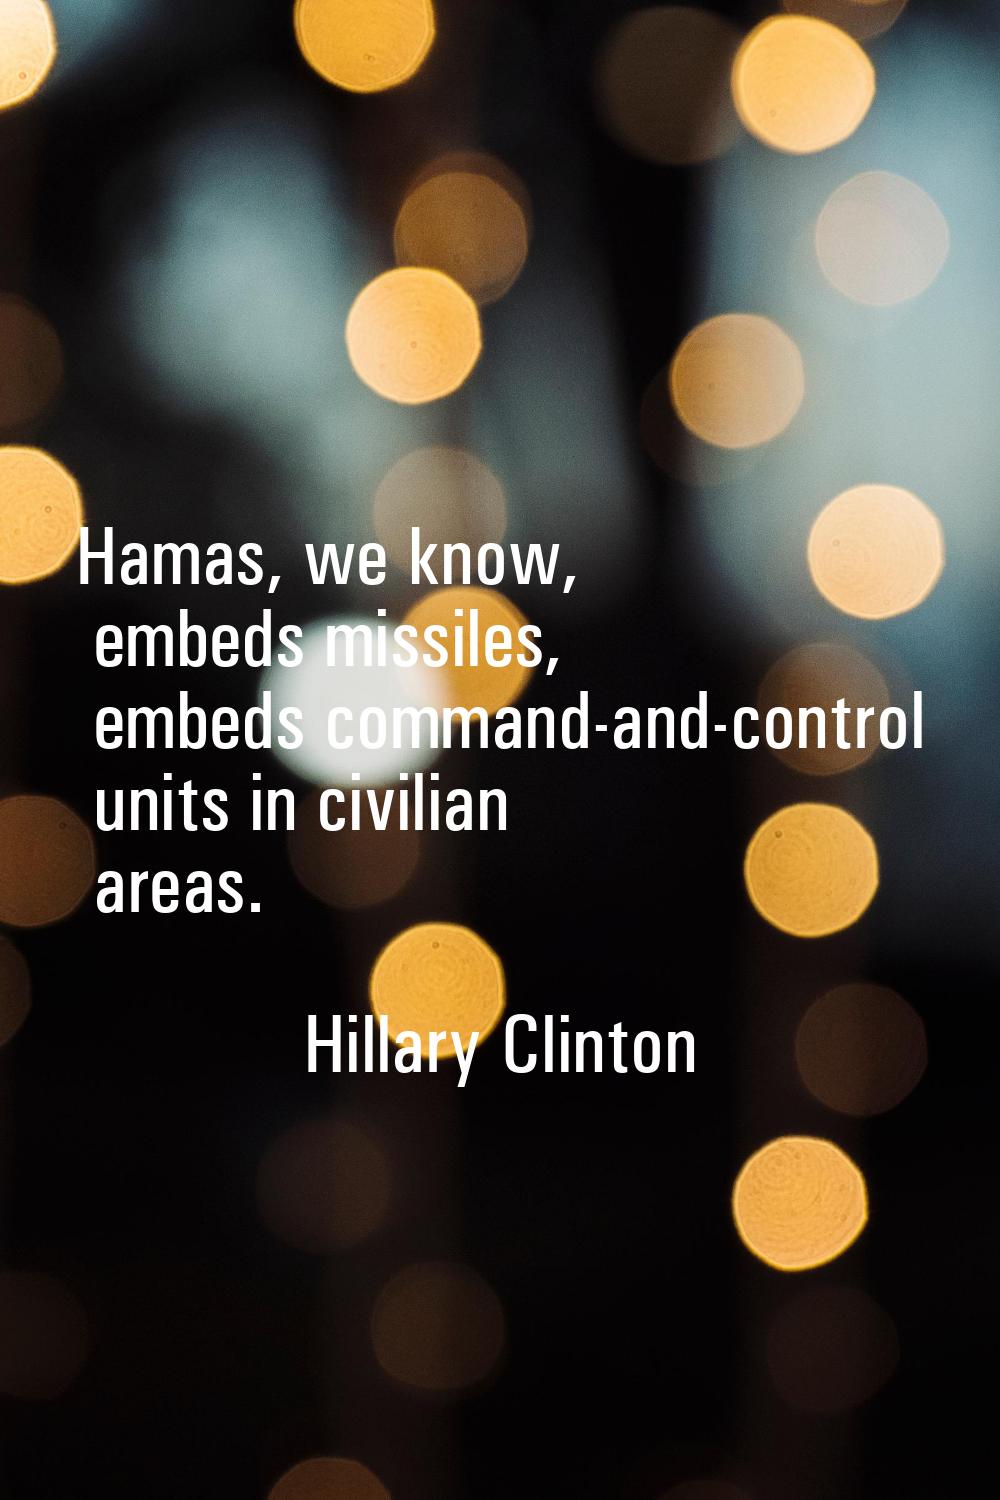 Hamas, we know, embeds missiles, embeds command-and-control units in civilian areas.